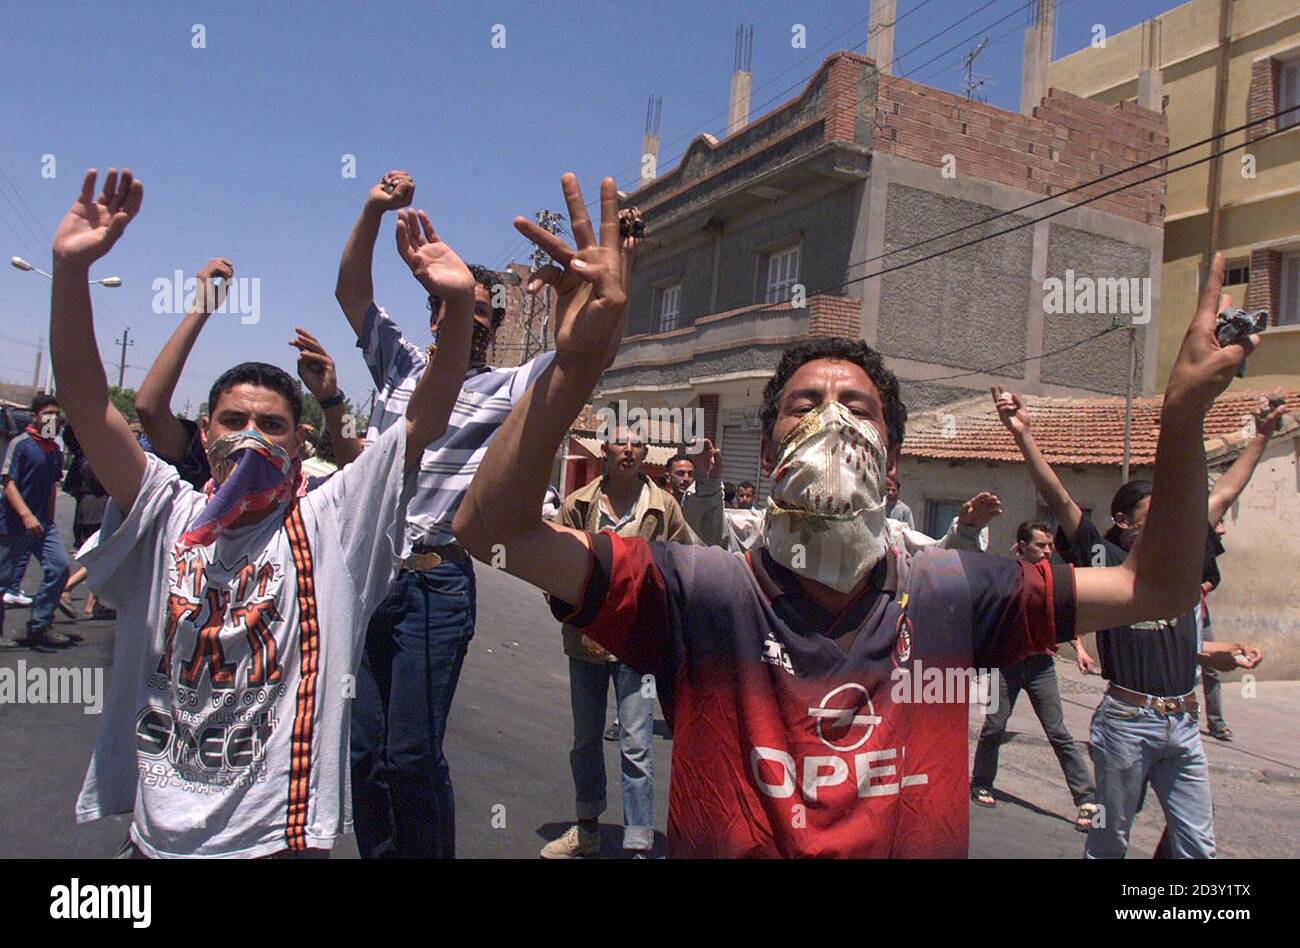 Youths with masked faces in Algeria's Berber-speaking Kabylie region raise their arms as they chant during clashes with gendarmes in El Esnam, 130 kms east of Algiers, May 29, 2001. Berber protesters demand the complete withdrawal of the 10,000-strong gendarme force whom they accuse of brutality and corruption. Riots, fanned by social and economic frustrations, broke out in the region on April 18 after a teenager died in the custody of the gendarmerie, an elite paramilitary force. Stock Photo